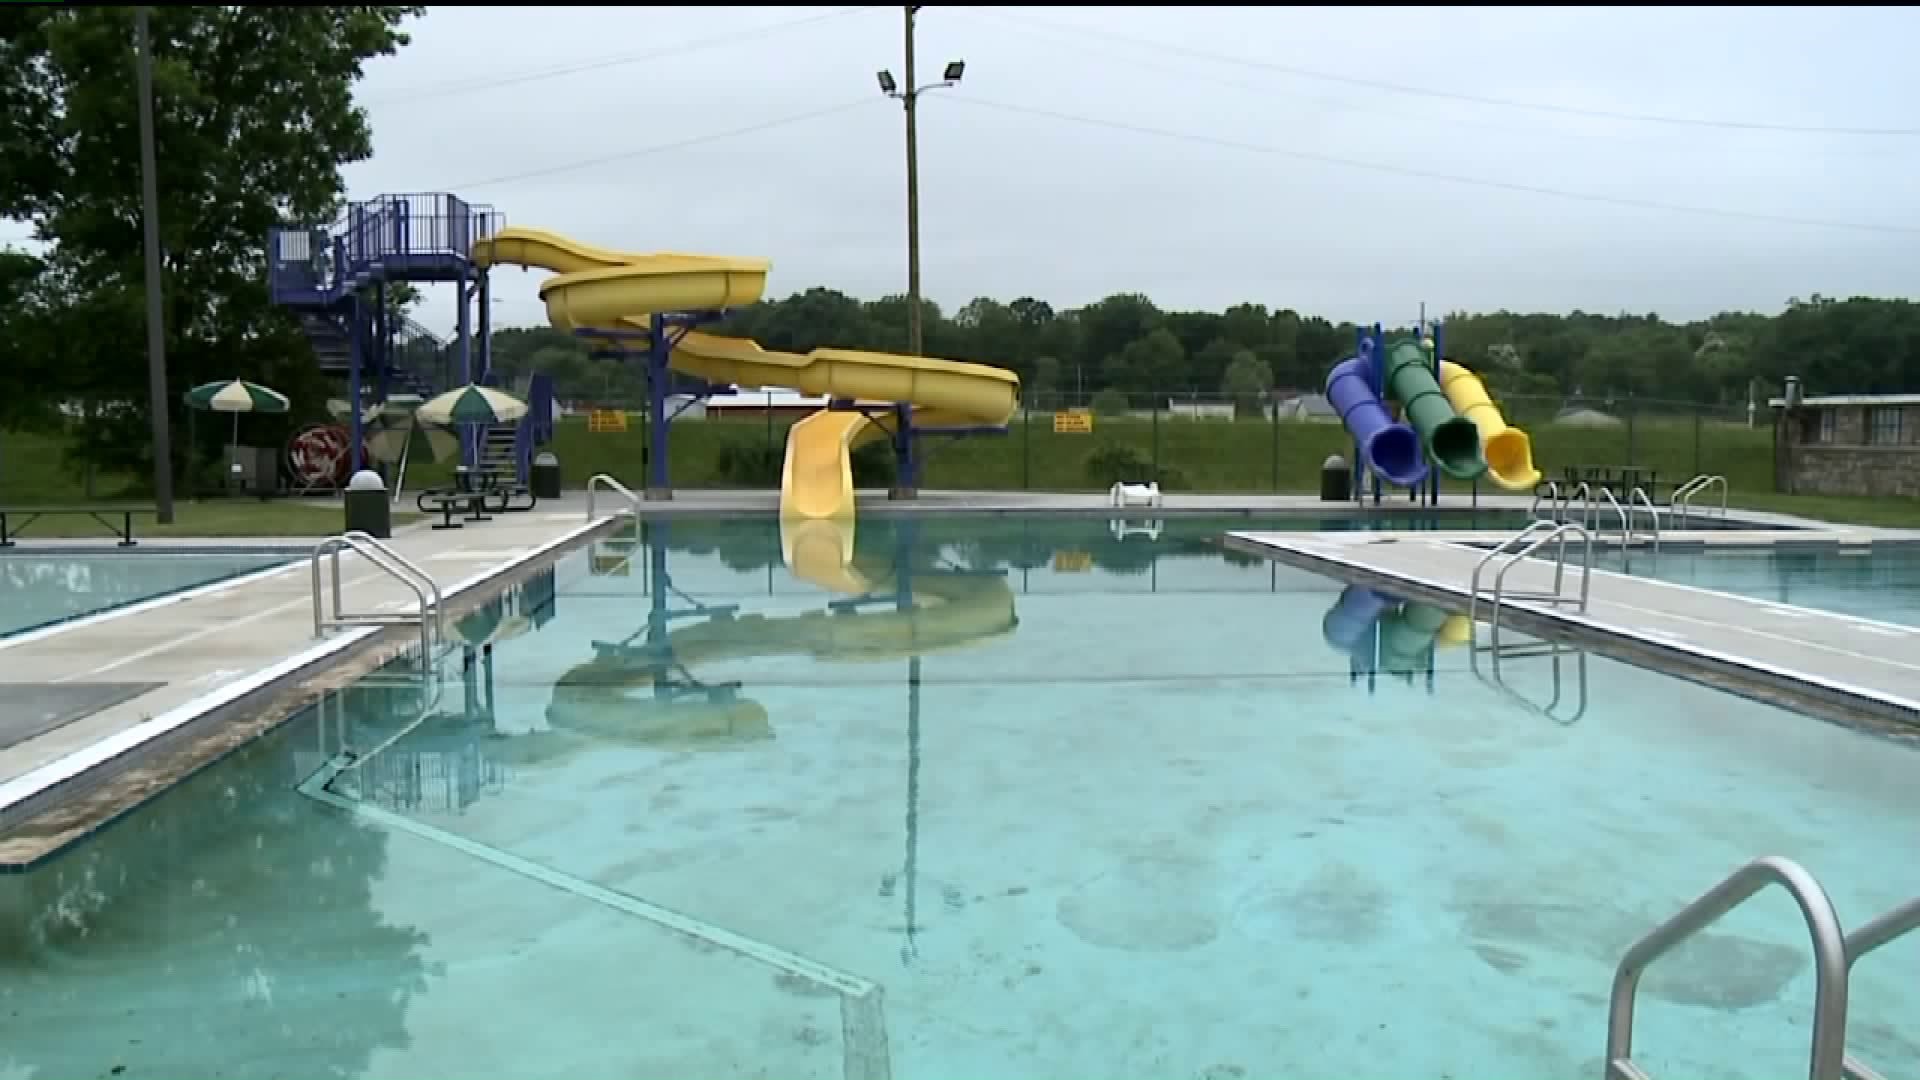 Public Pools in the Poconos Opening This Weekend